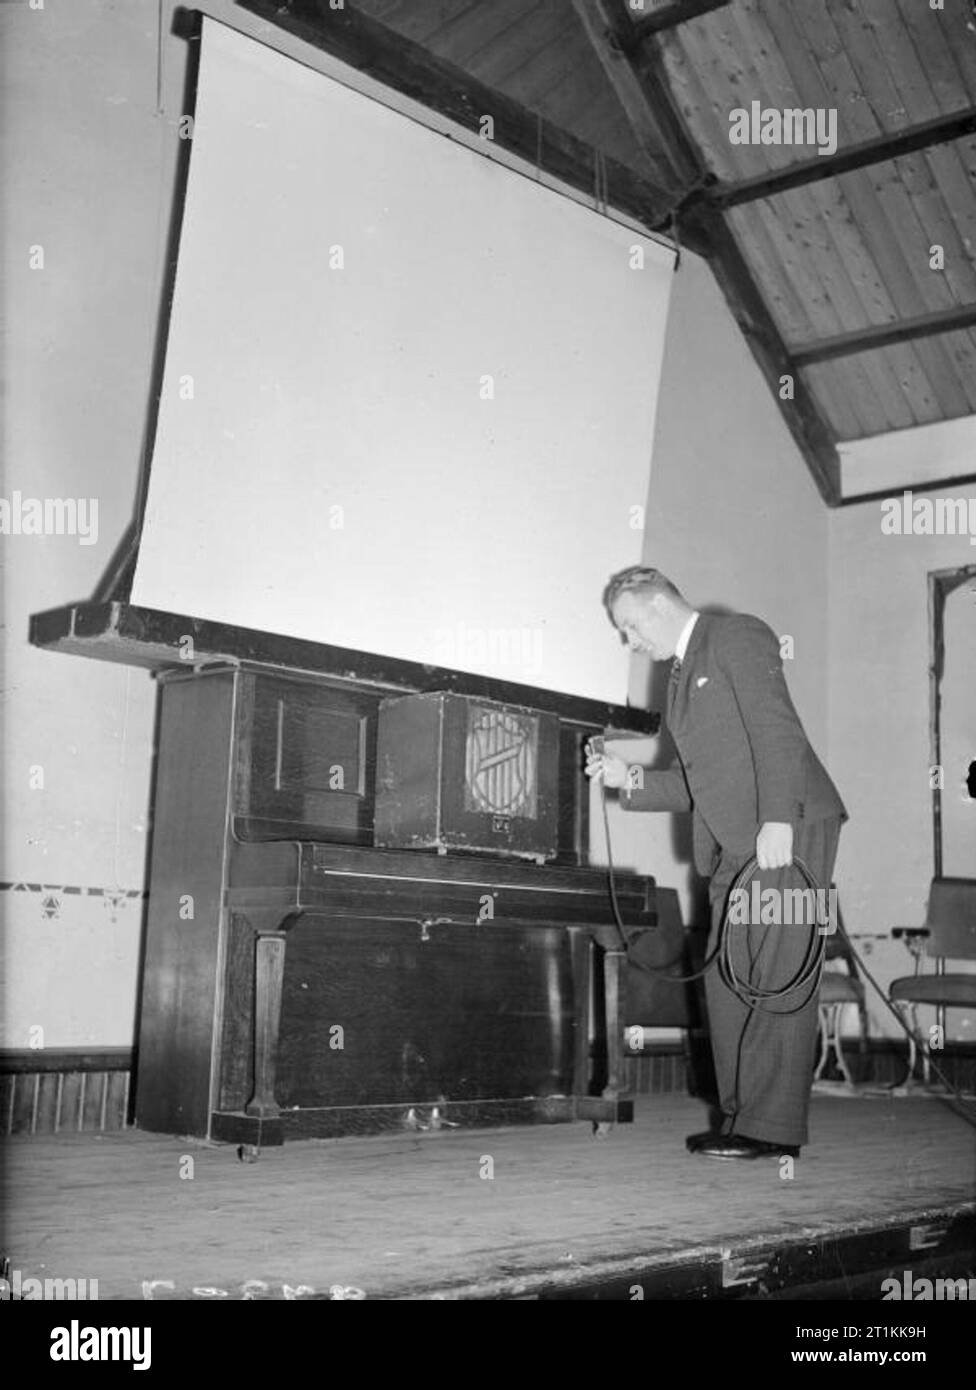 Film Show at Highest Village in the Highlands- Ministry of Information Film Screening, Tomintoul, Banffshire, Scotland, UK, 1943 Ministry of Information Film Operator John Macdougall sets up a screen and loudspeaker in the Memorial Hall in Tomintoul in preparation for the screening of a Ministry of Information film. The loud speaker is resting on the closed lid of an upright piano, with the screen resting on the top of the piano. Mr Macdougall is connecting the 'soundbox'. The original caption states that 'power is provided by the generator in [his] van outside'. Stock Photo